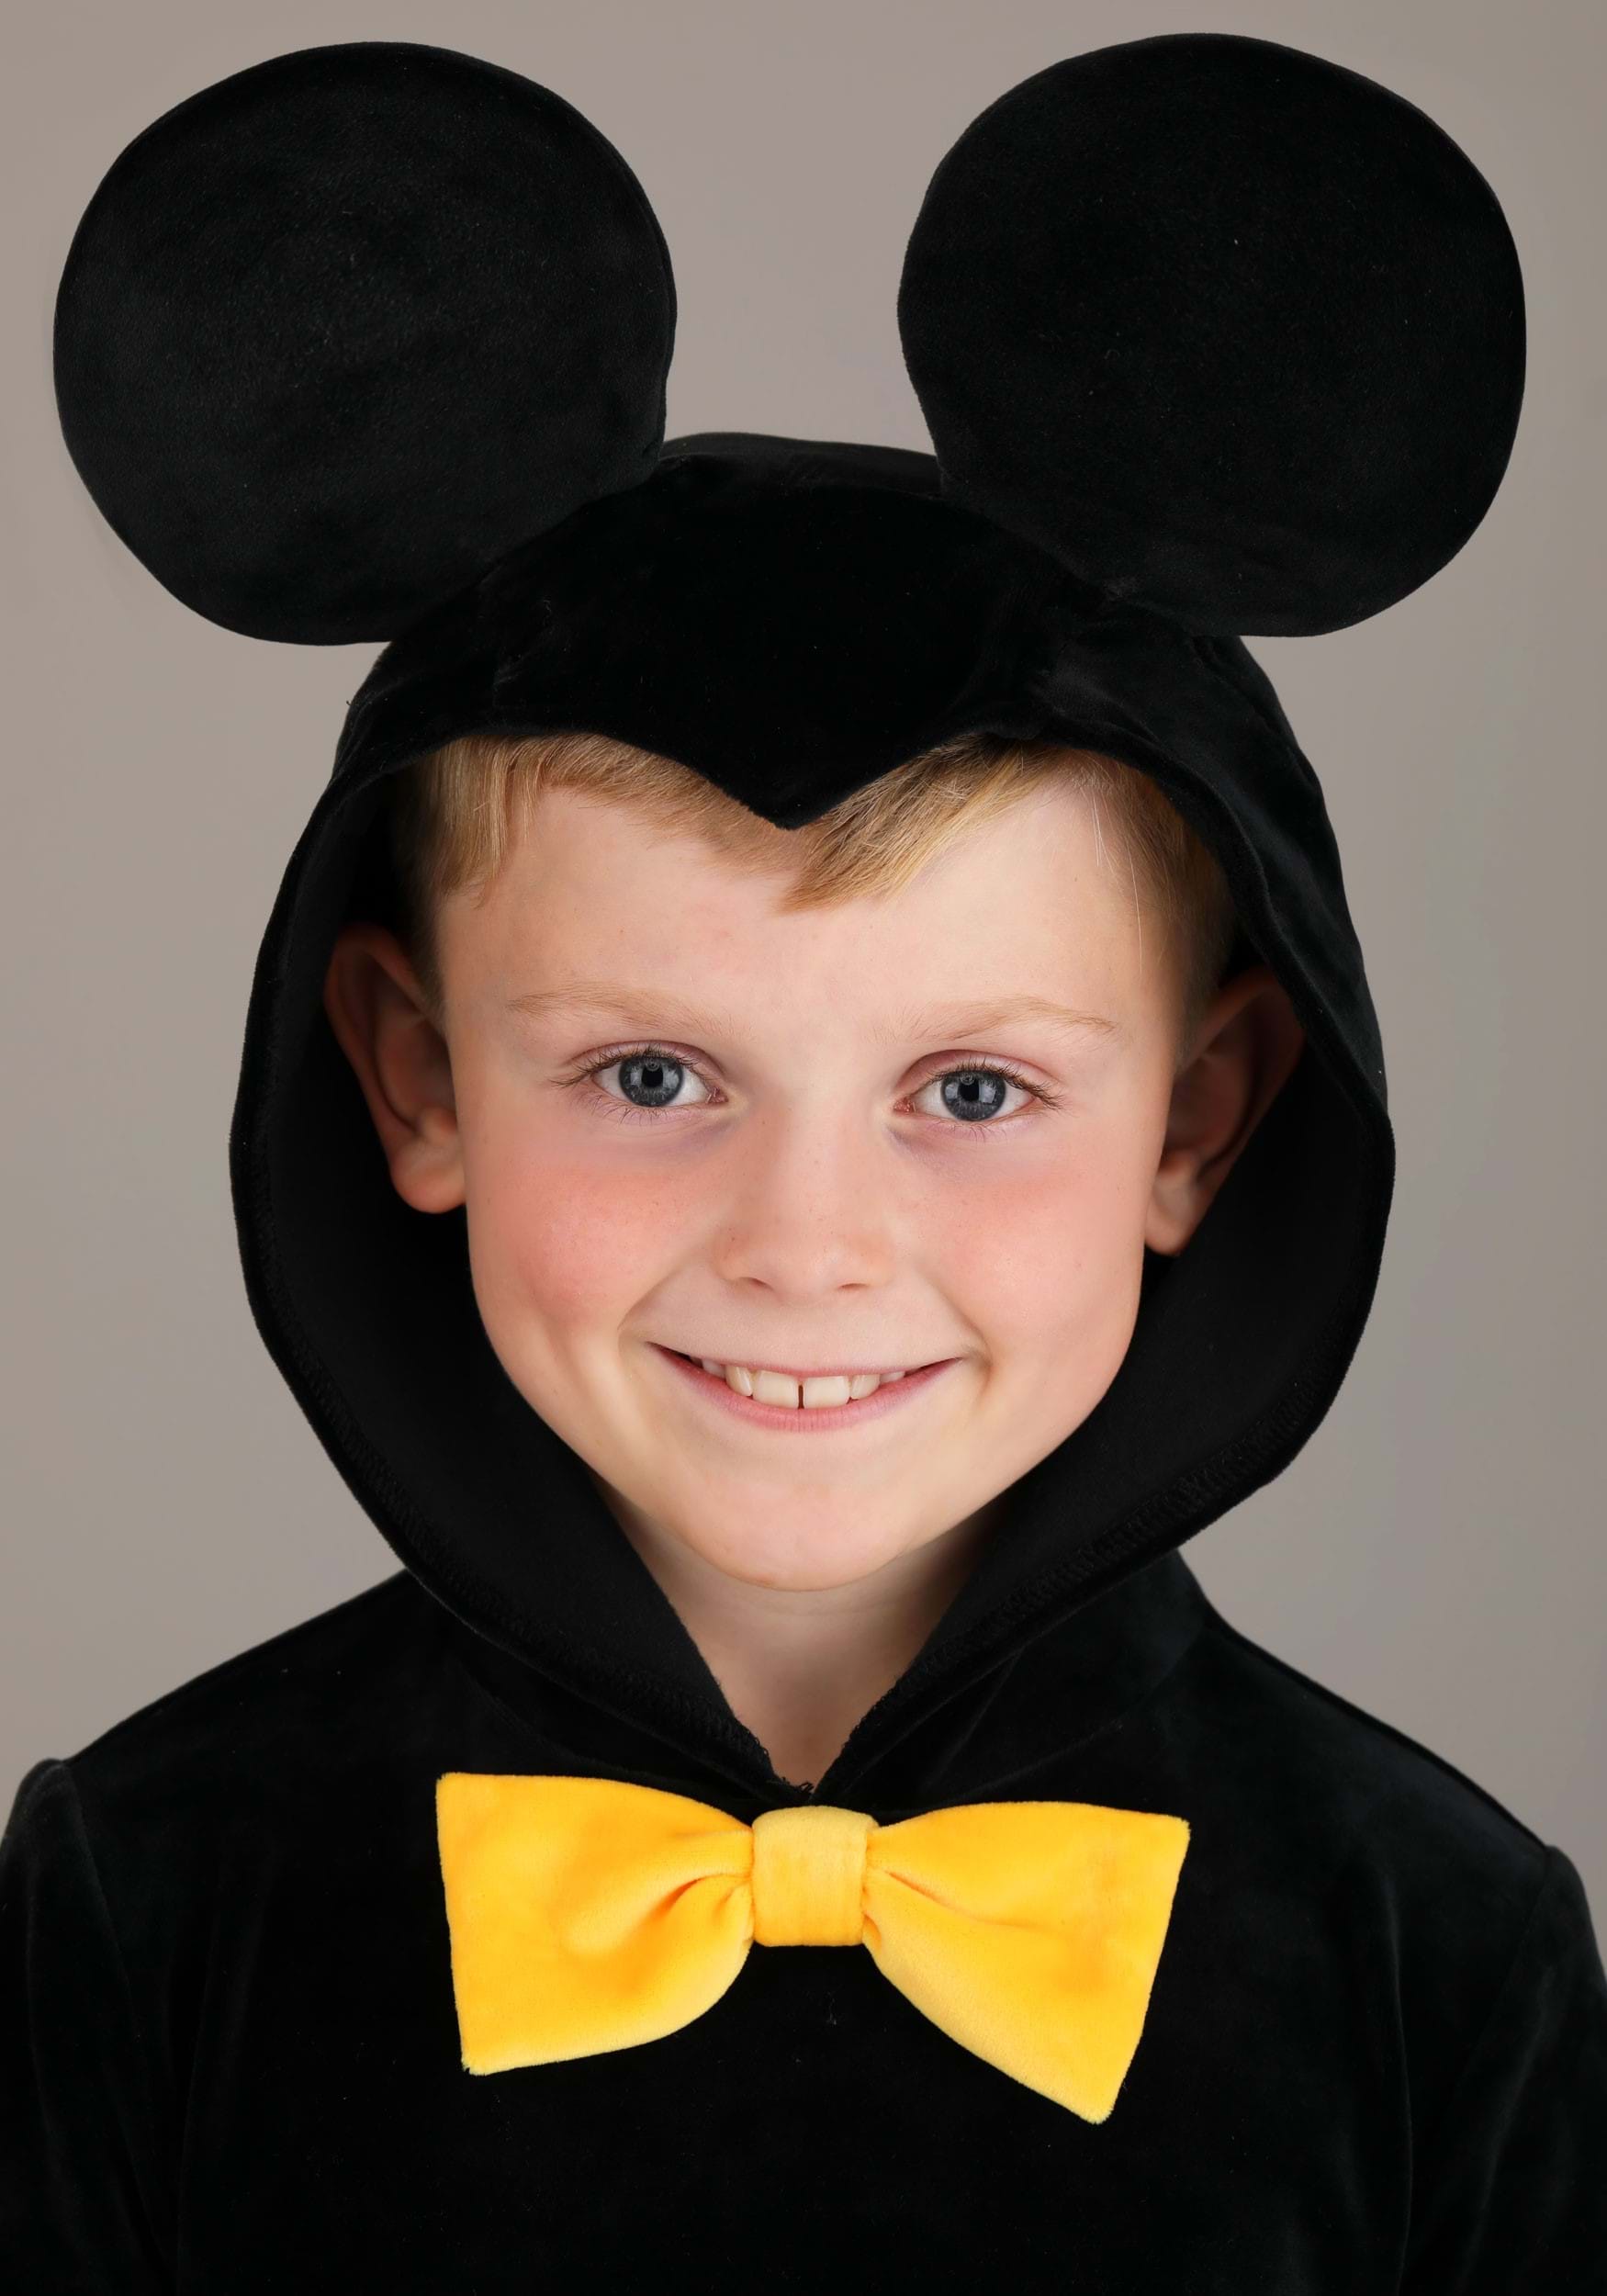 Mickey Mouse Halloween Costumes for Adults & Kids